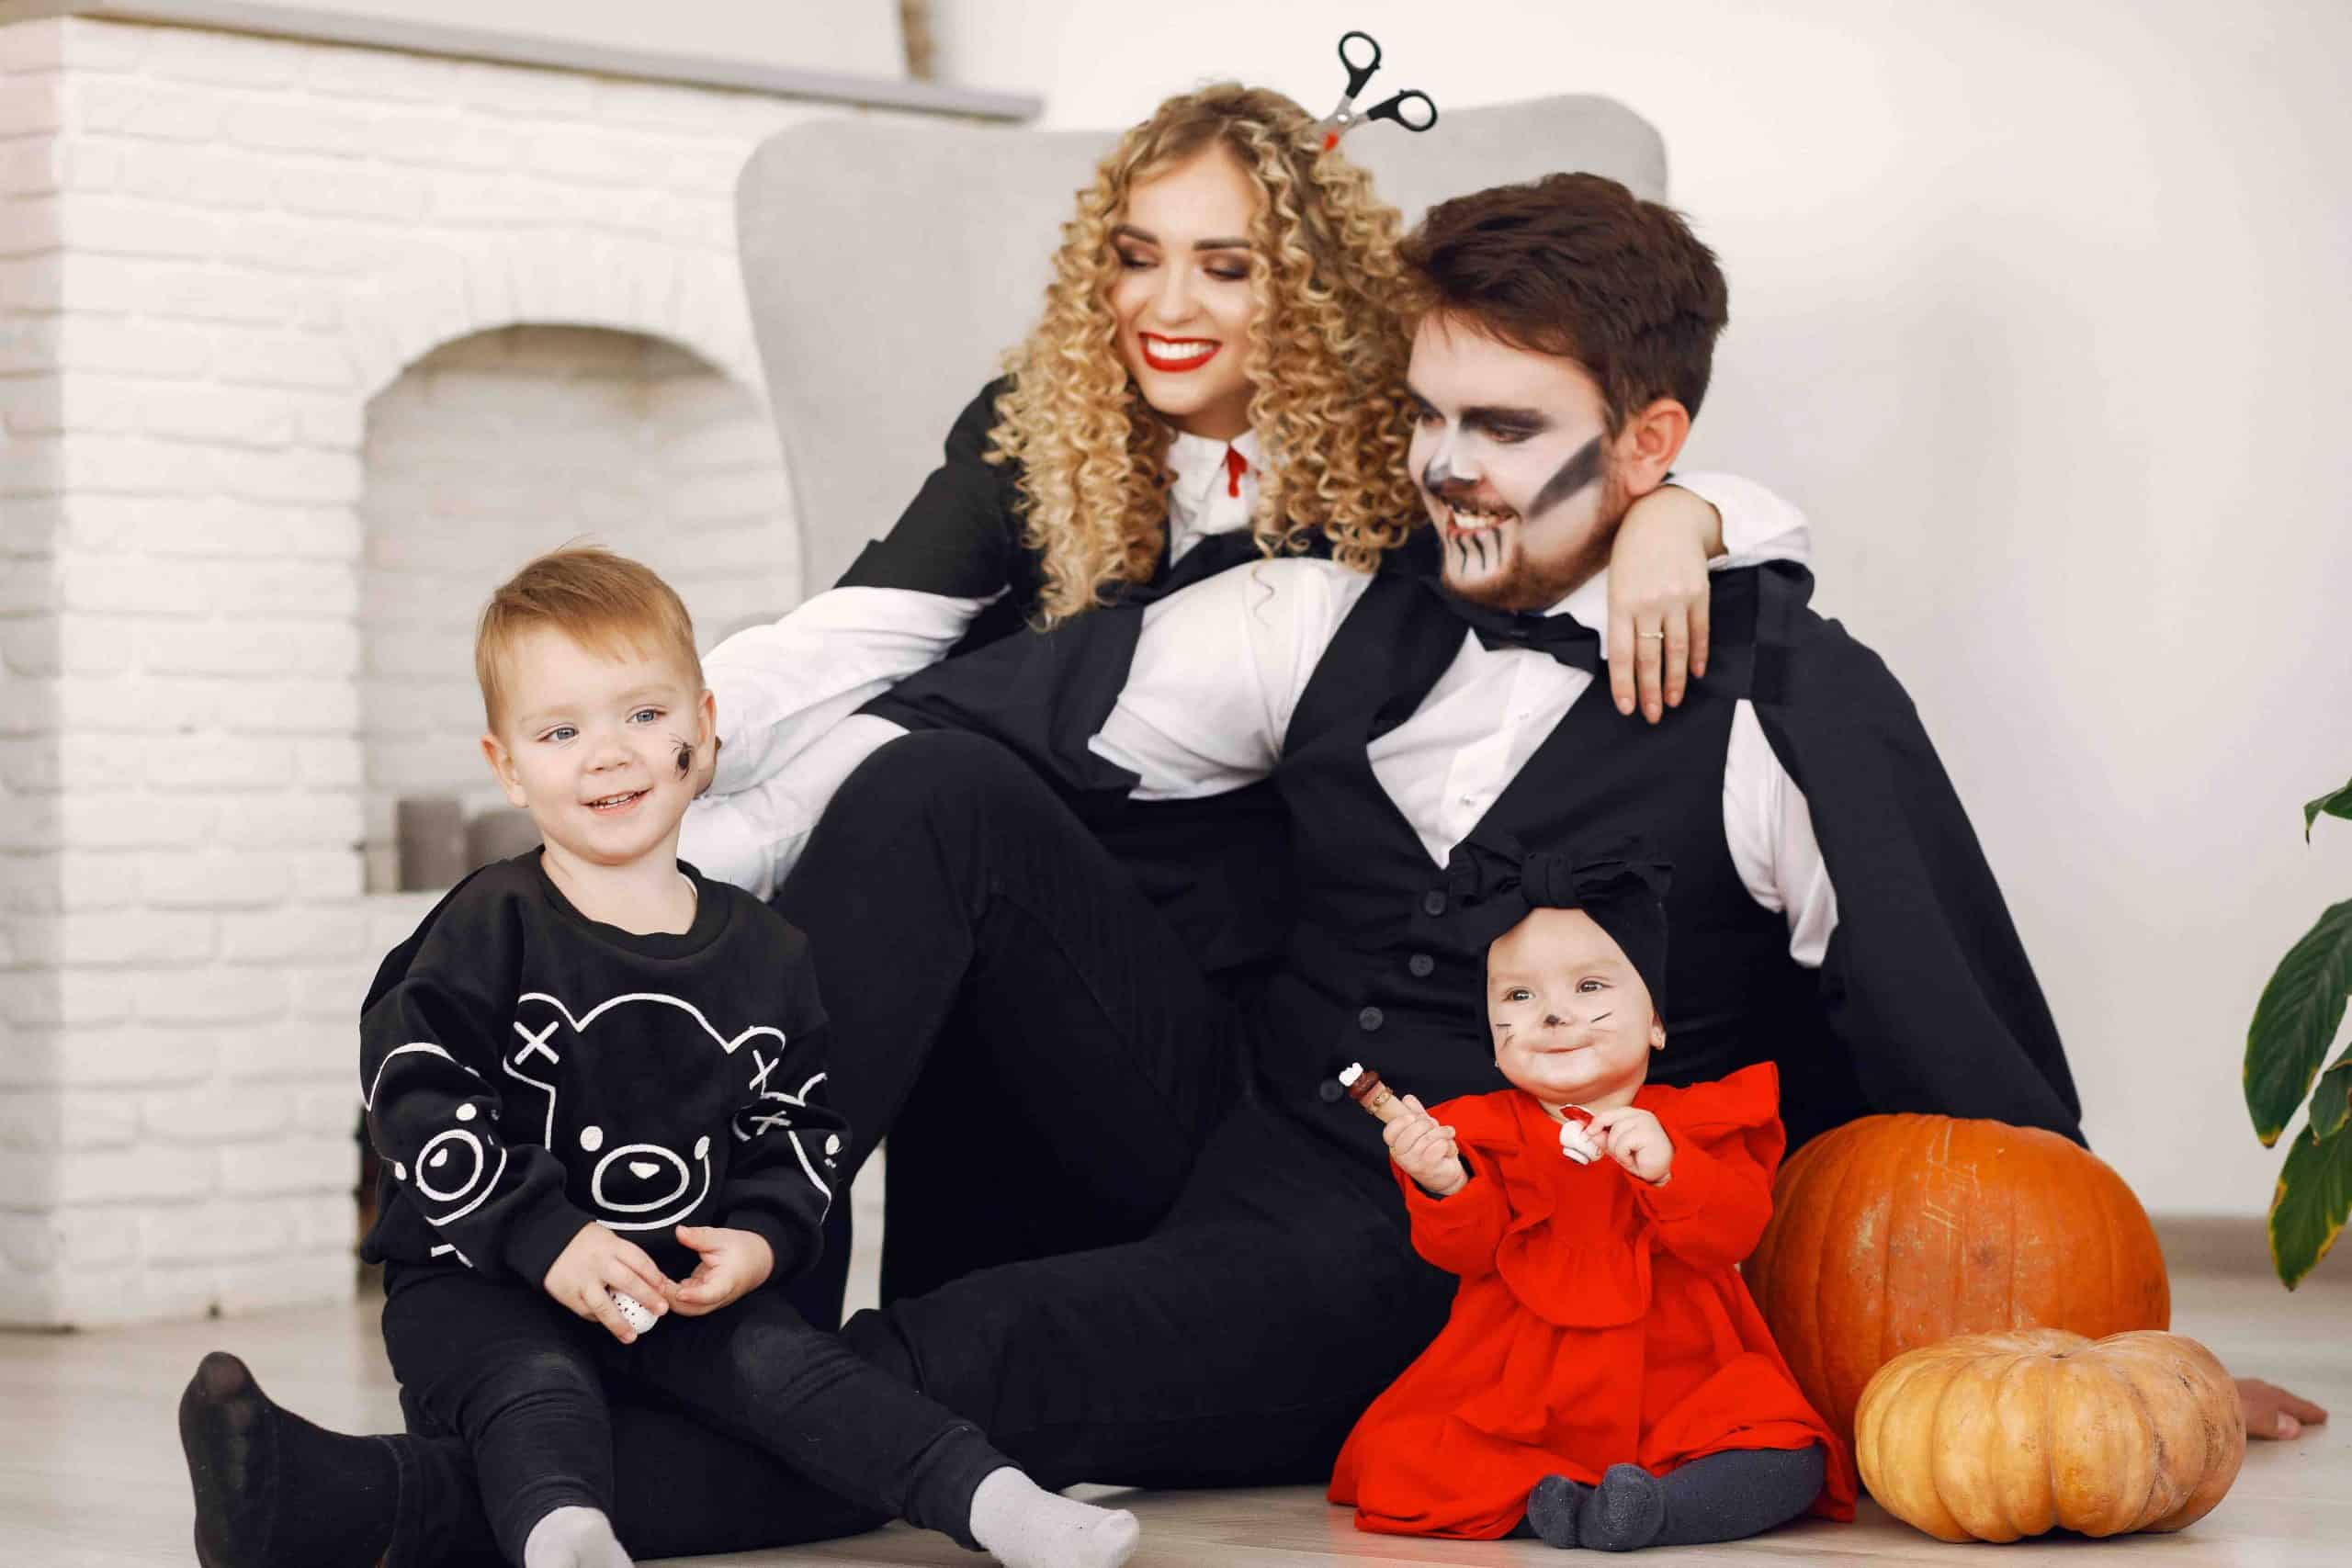 Fun, Easy and Sinful Ideas to Match Couple Outfits this Halloween Festival?